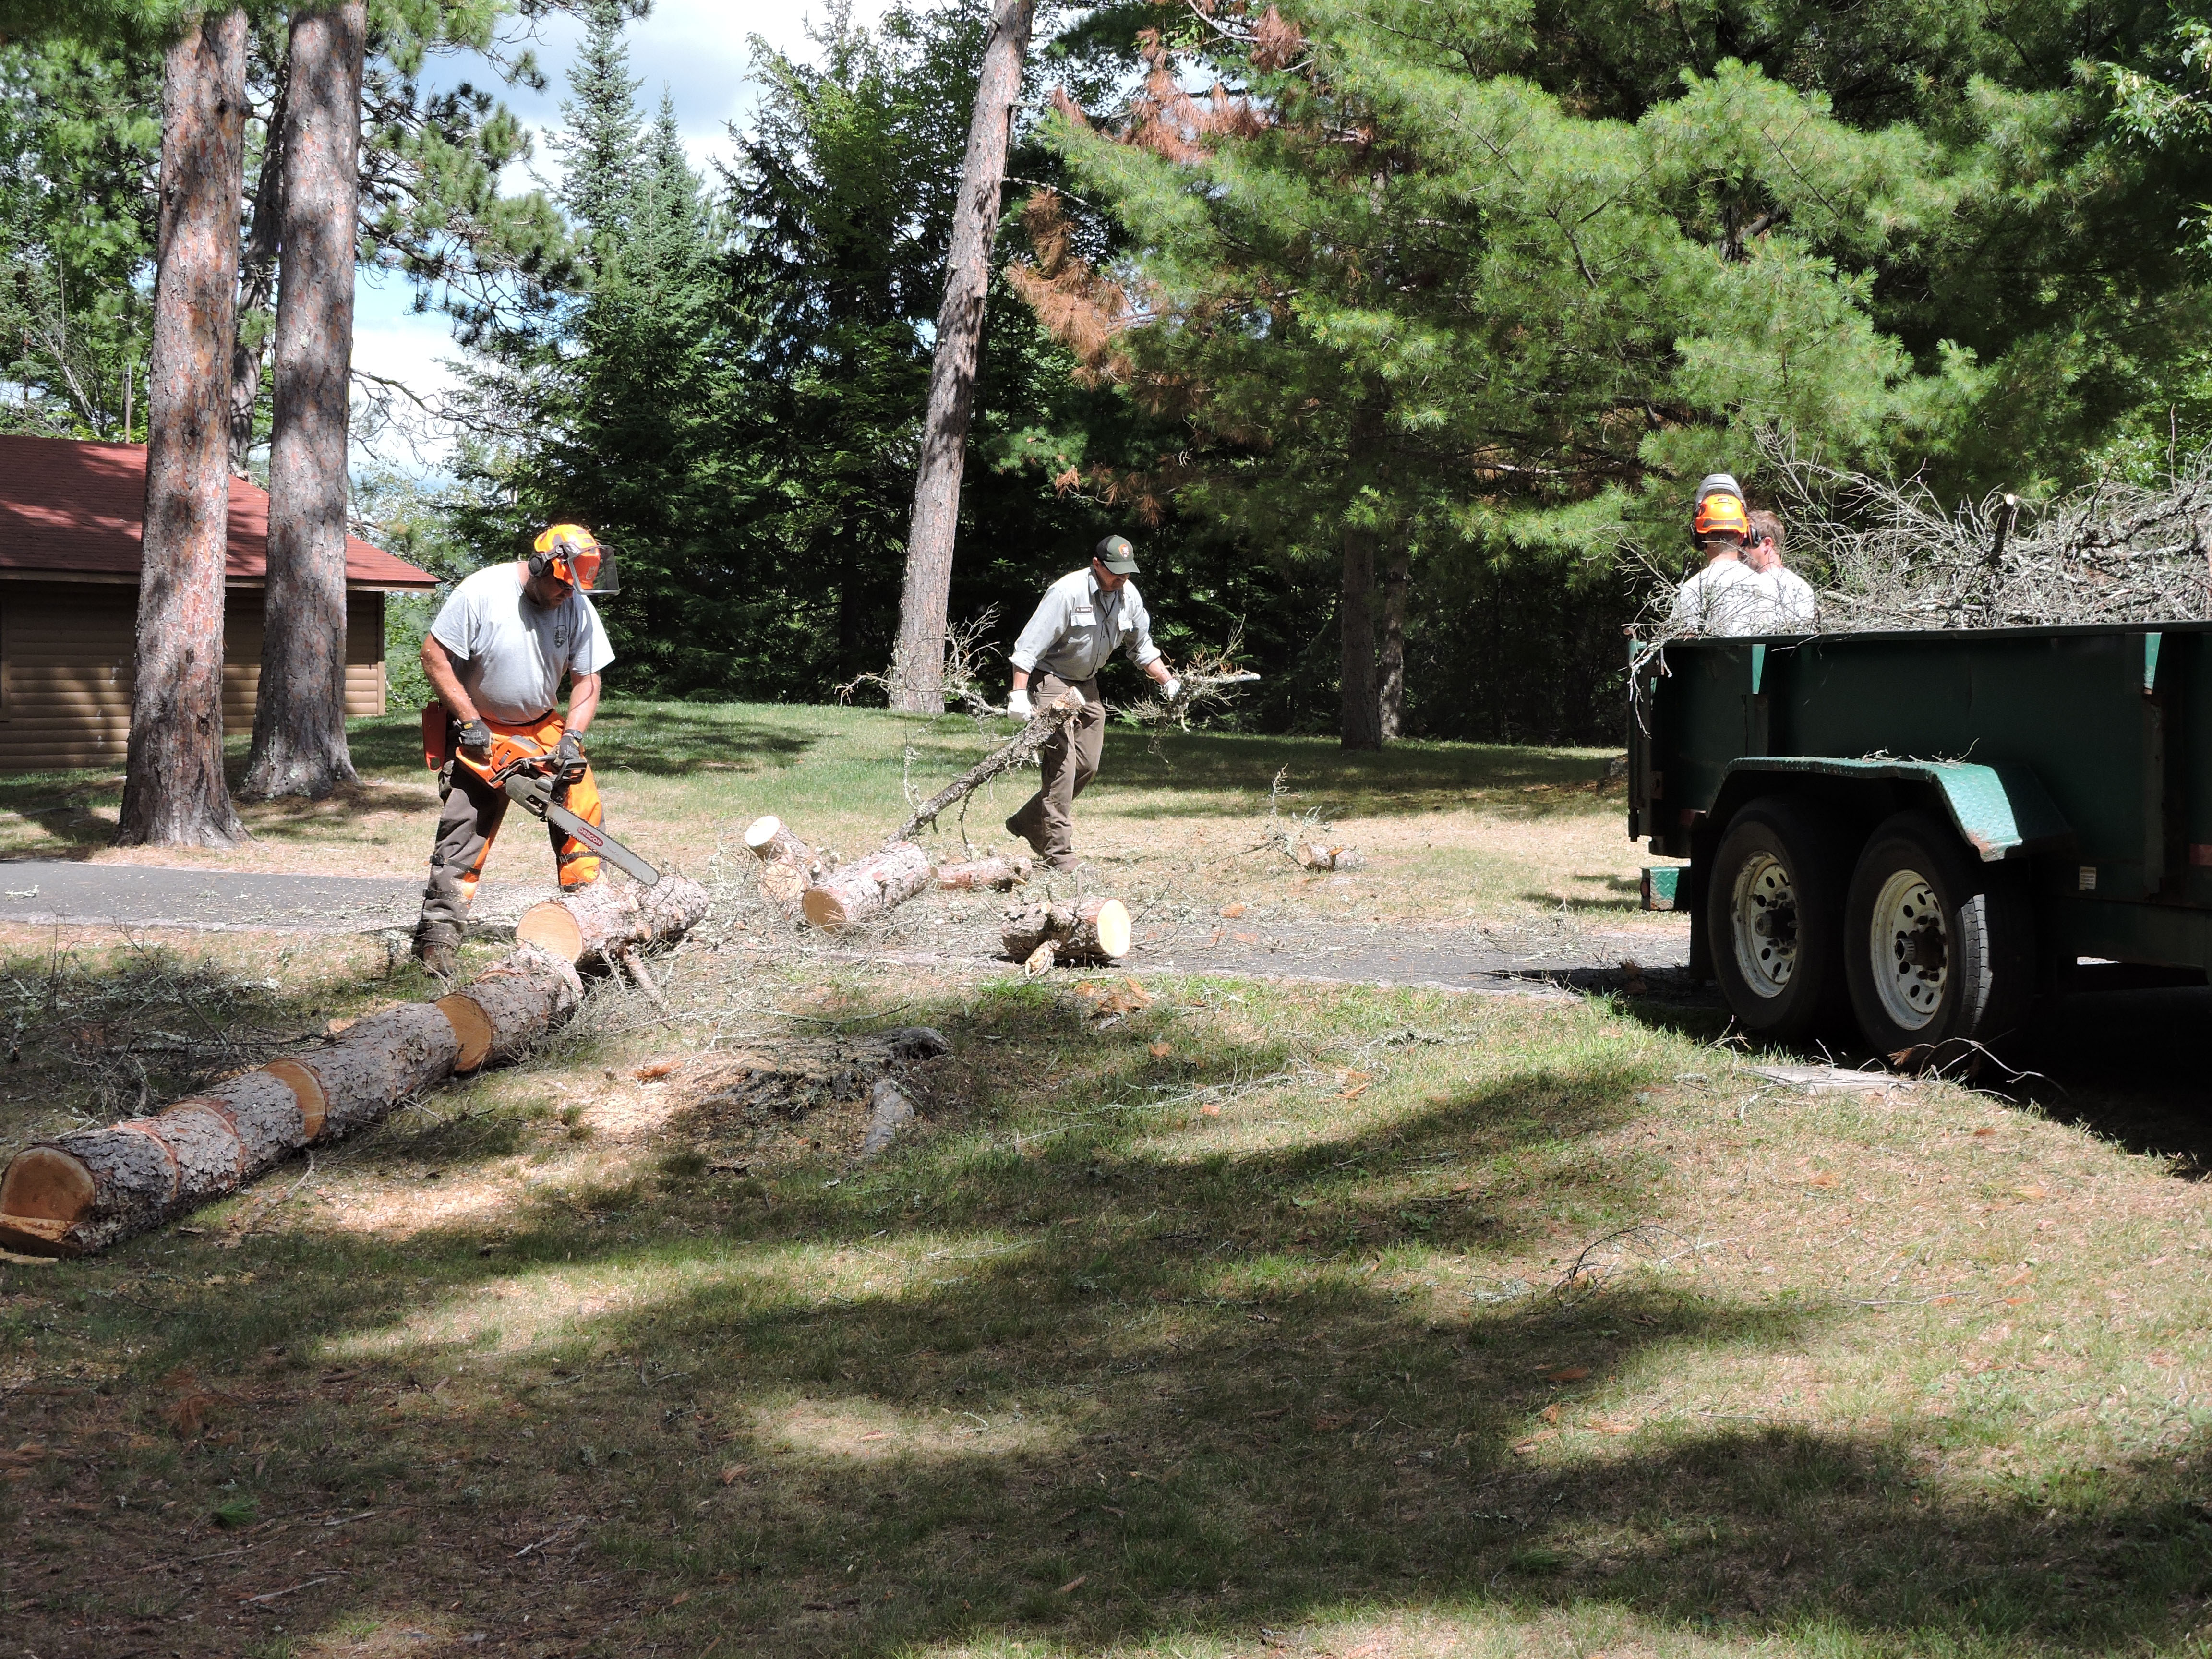 a worker wearing orange safety equipment and green and grey uniform uses a chain saw to cut a fallen tree.  Three other workers drag limbs and logs to a trailer for removal.